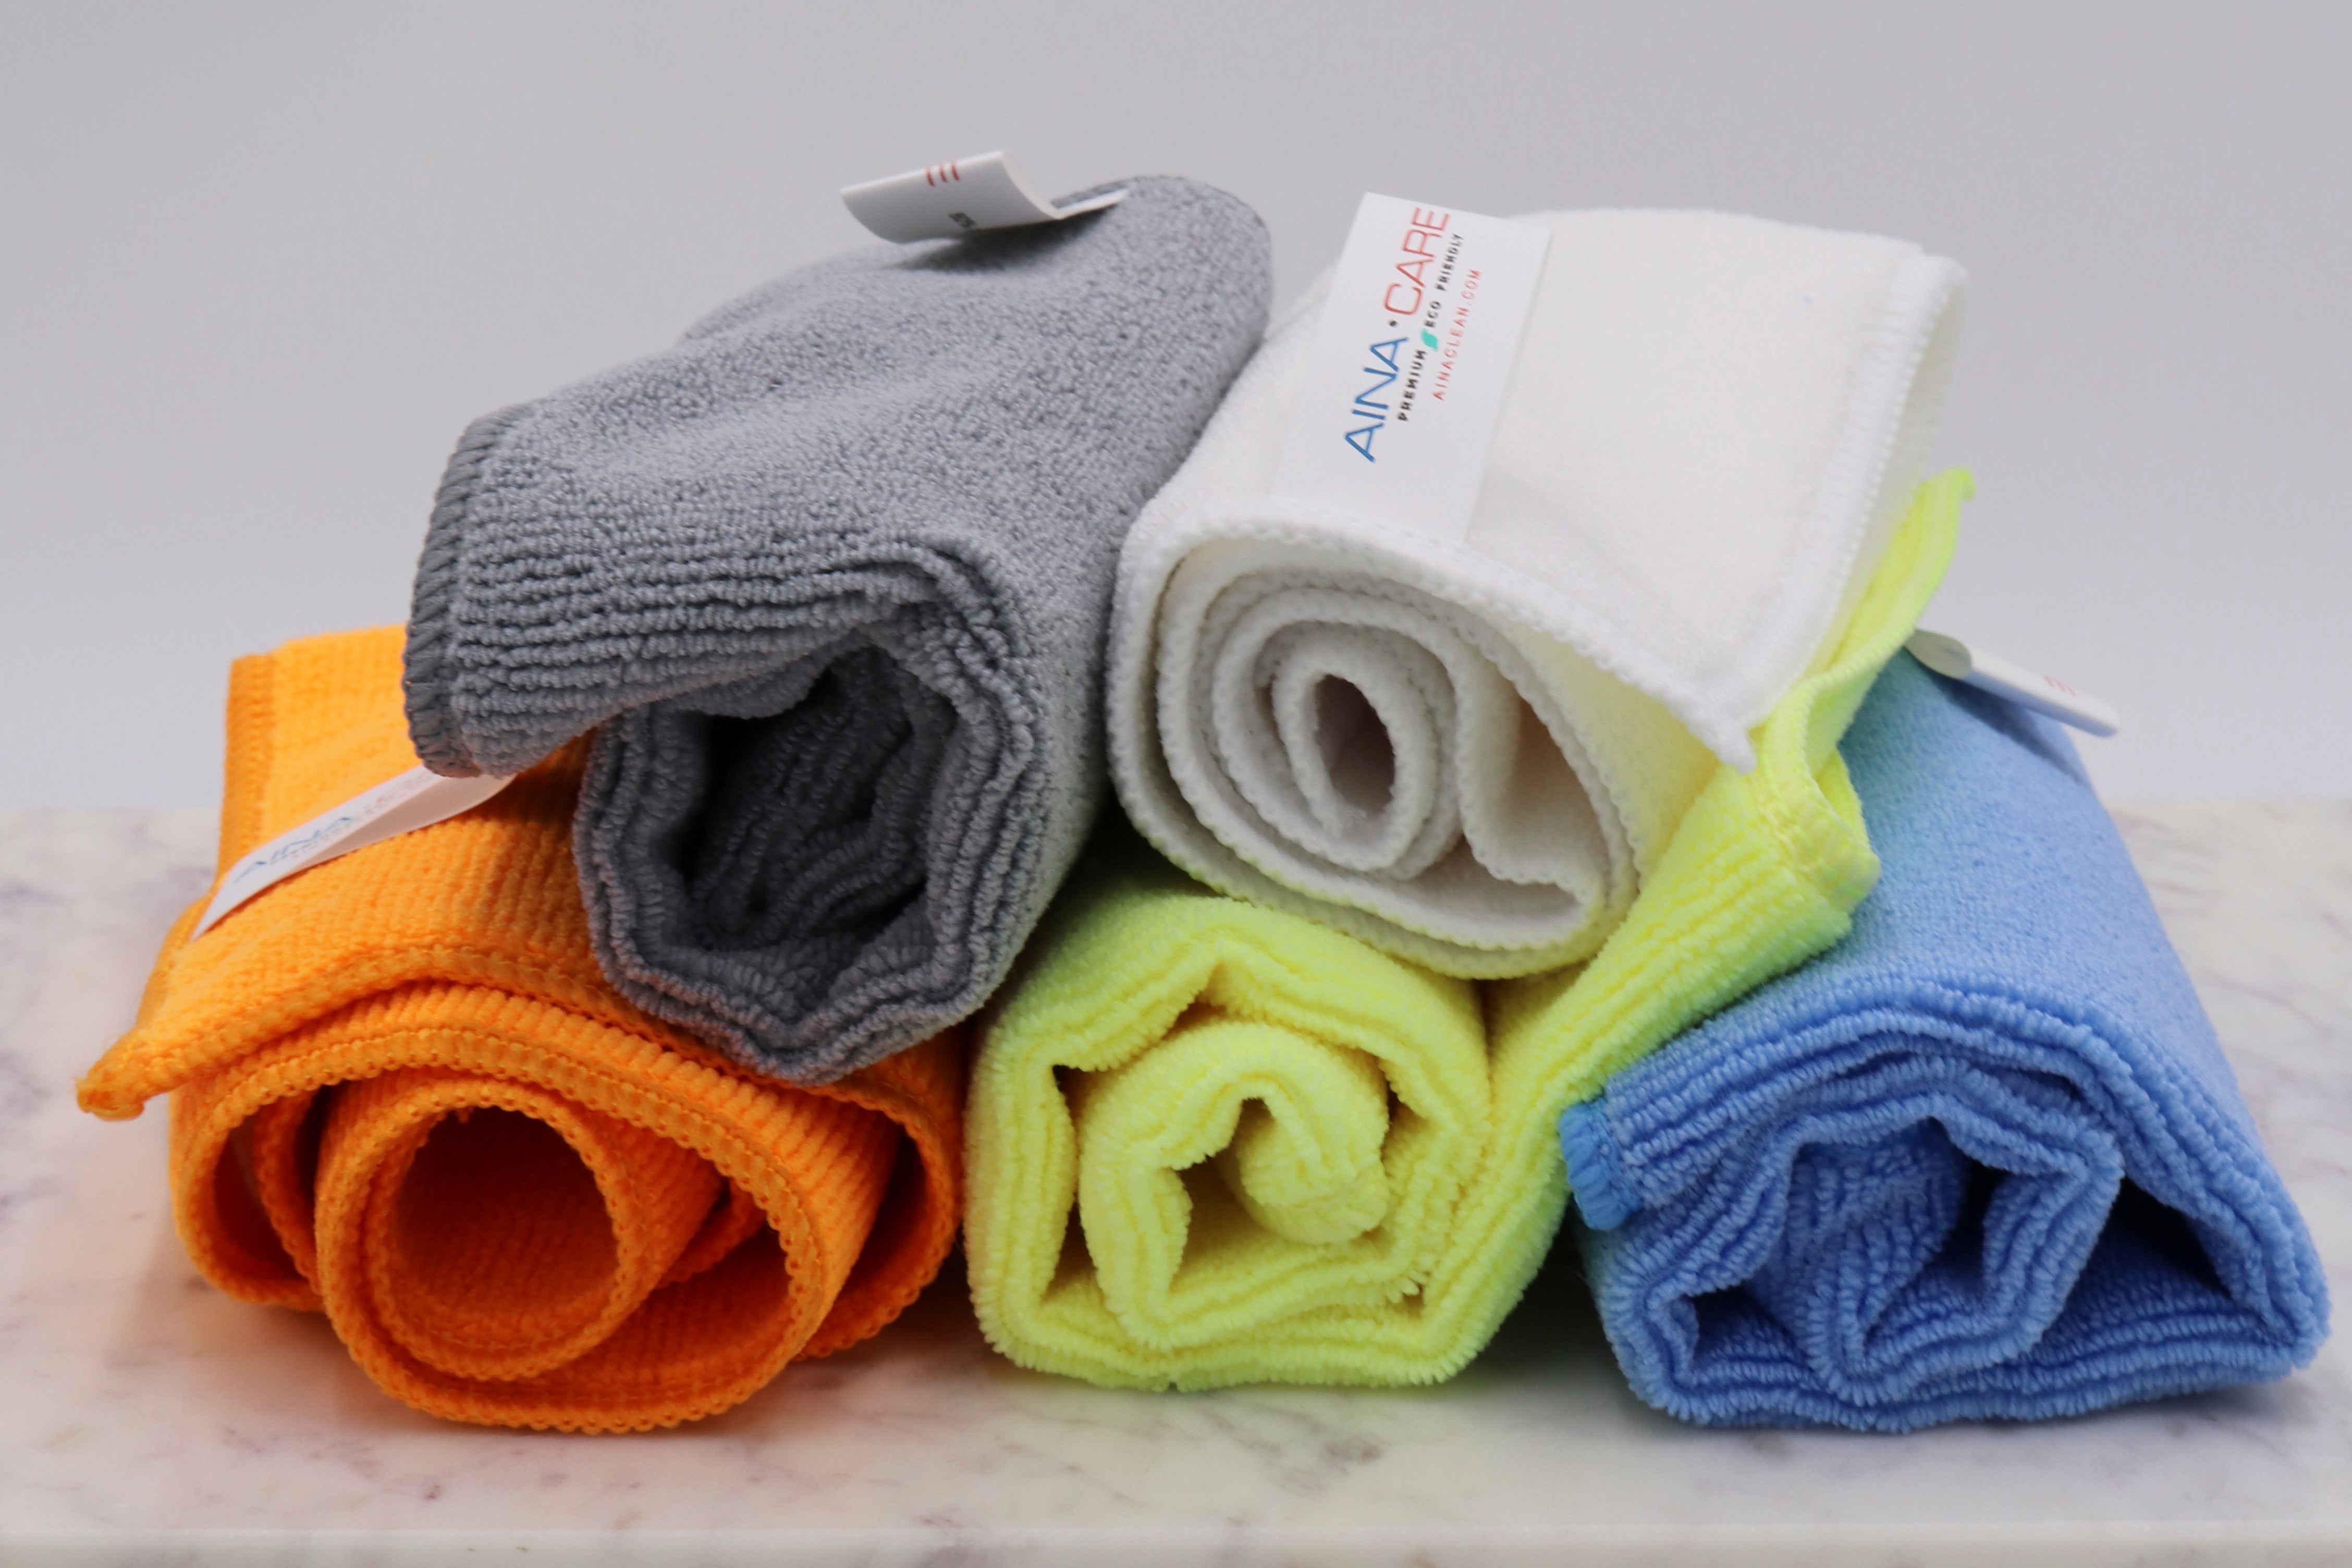 Close up view of microfiber cloths from AinaCare in each color (grey, white, orange, neon yellow, and blue).